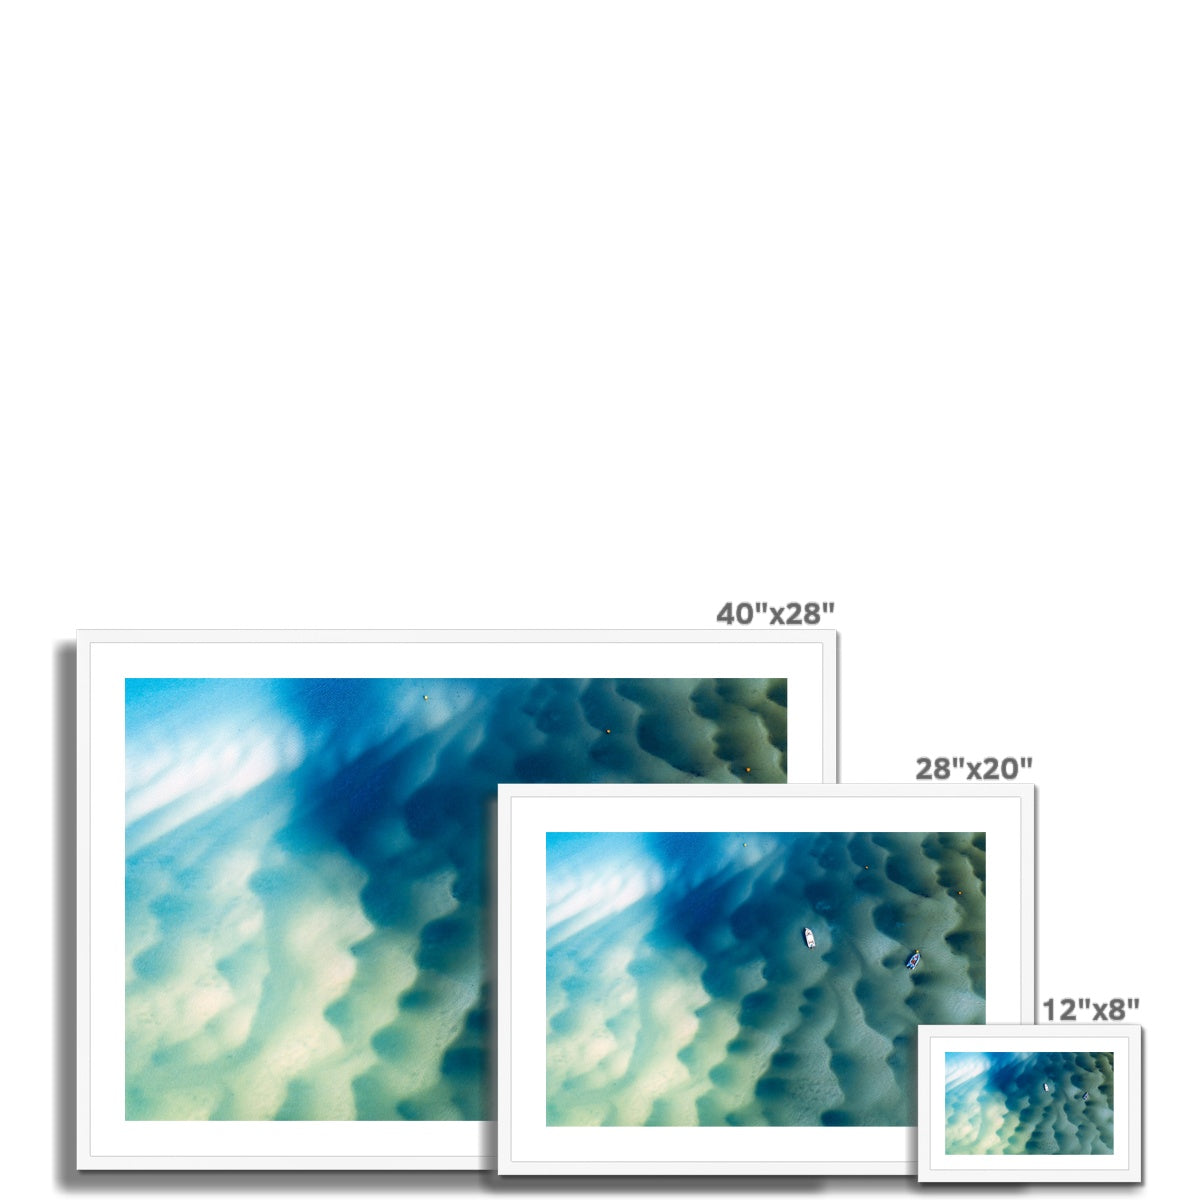 padstow ripples frame sizes